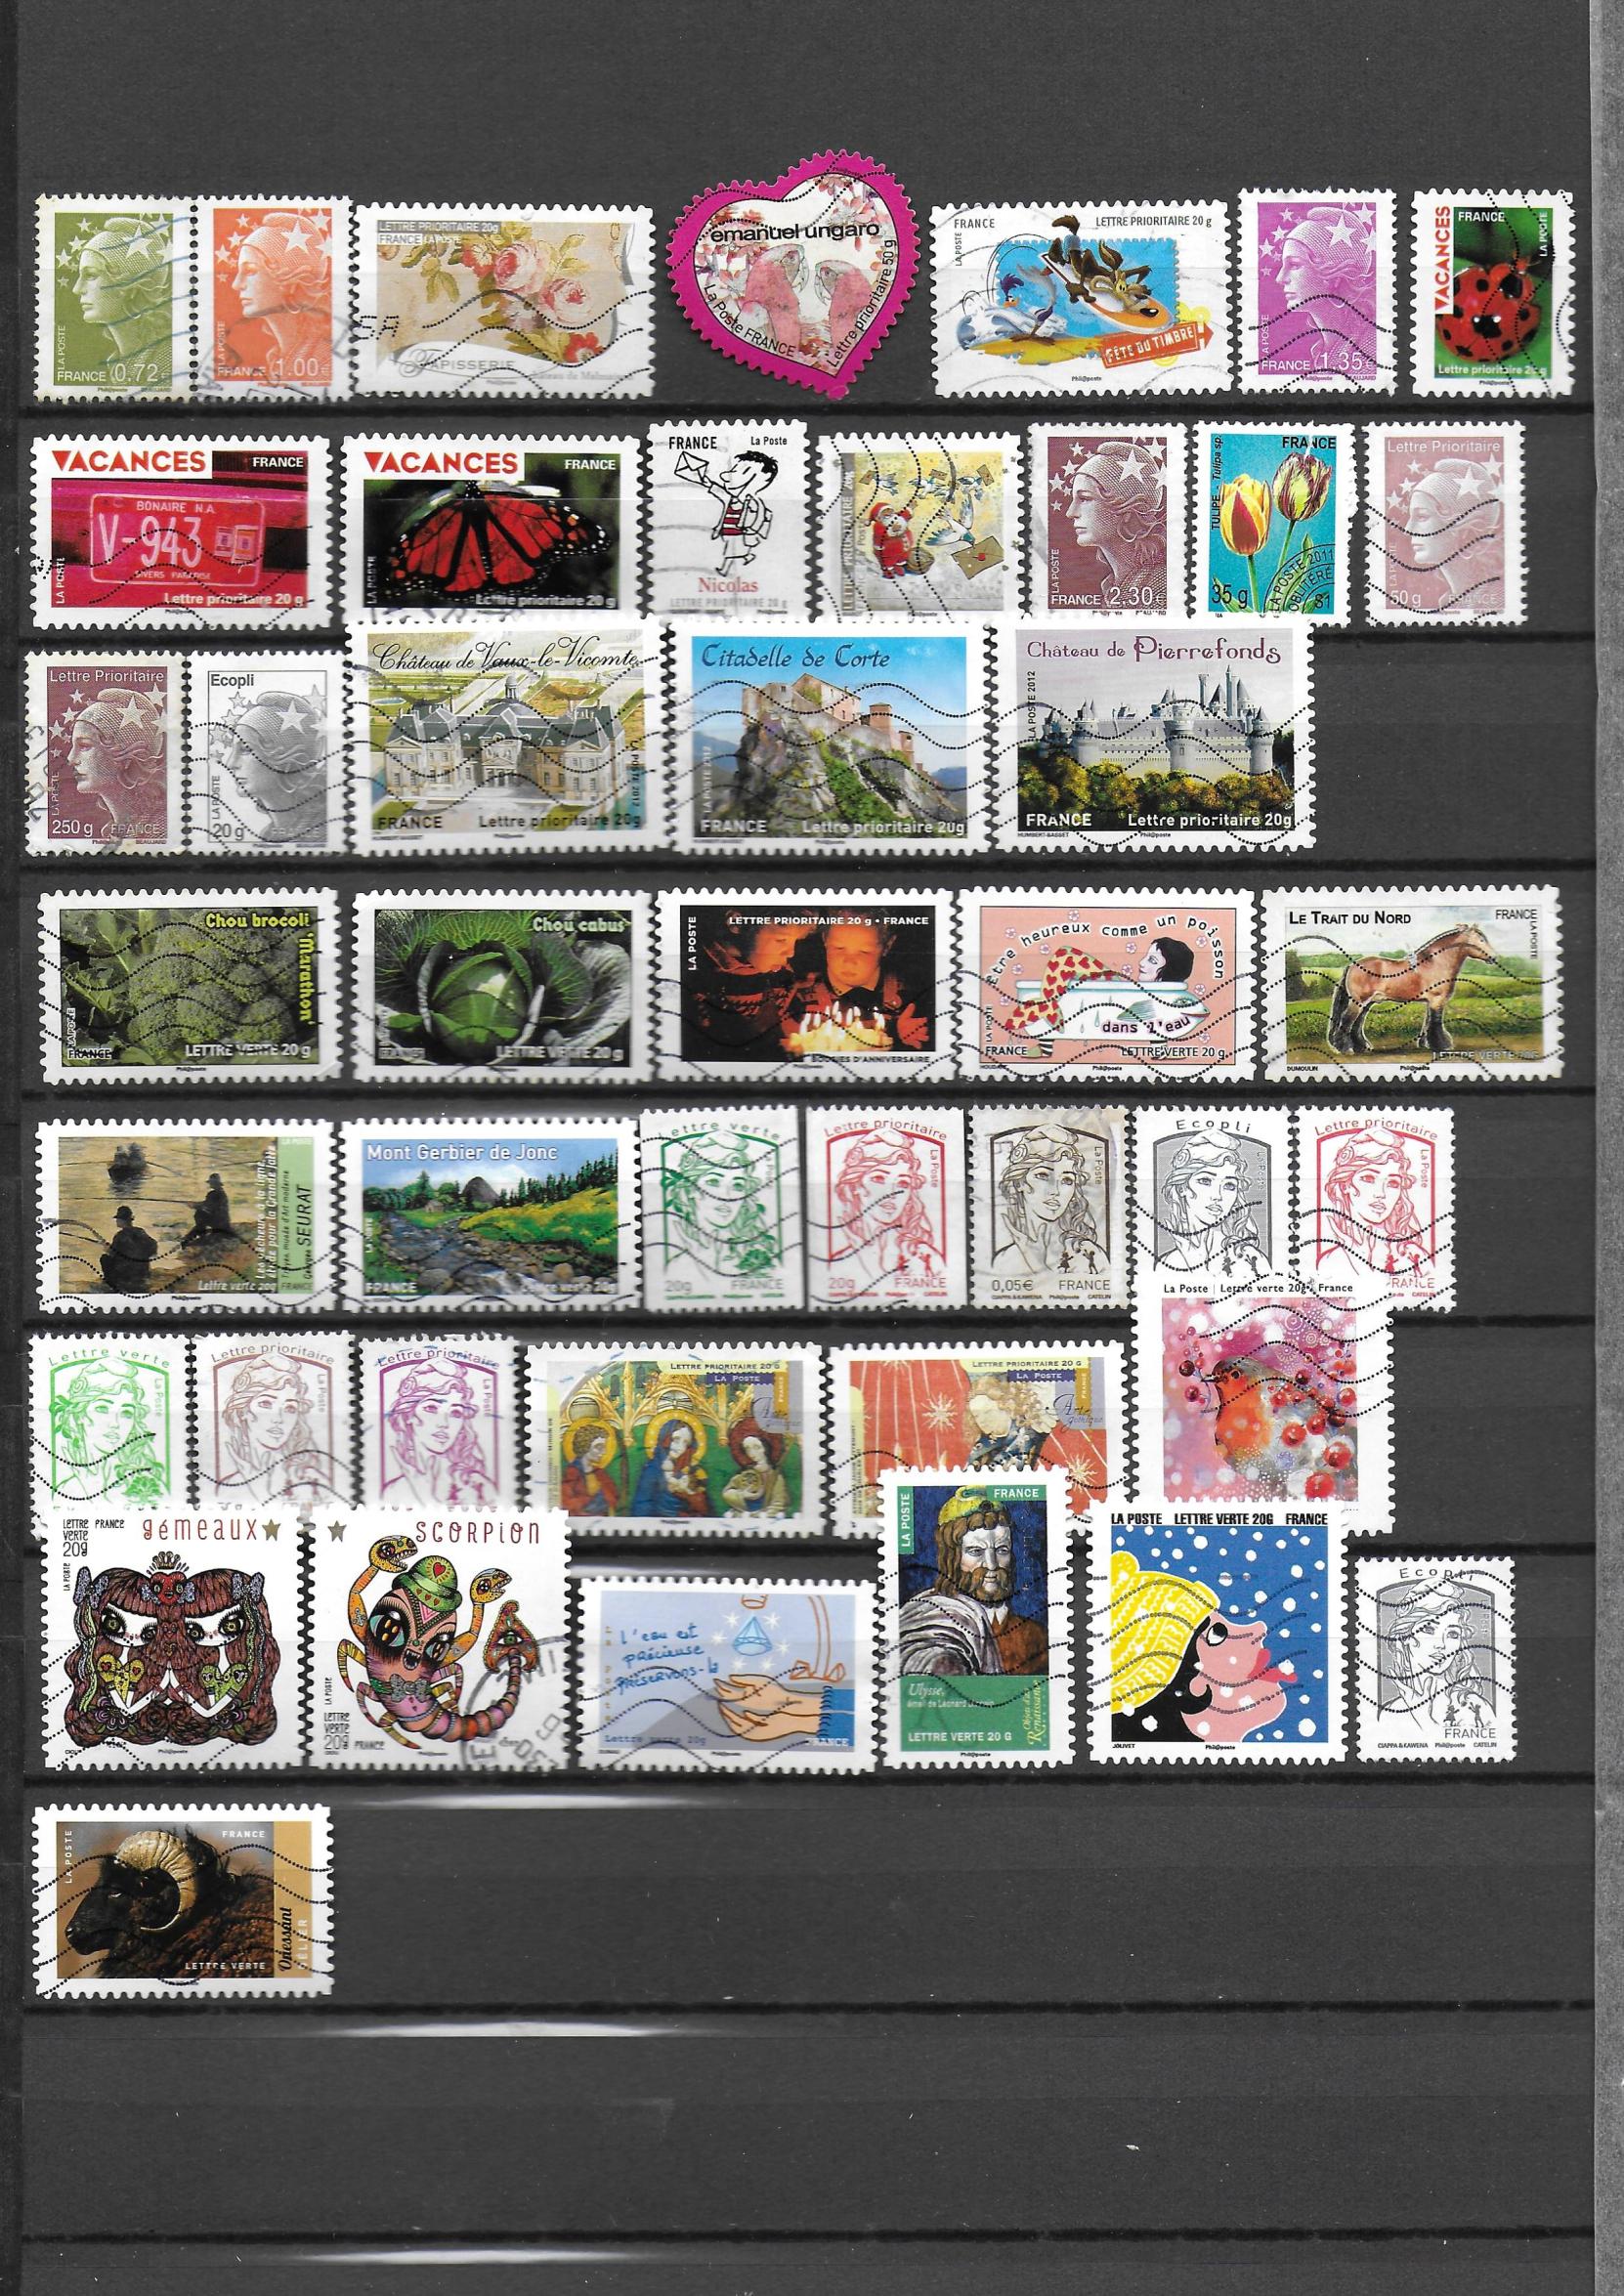 Timbres France 10 - Copie.jpg